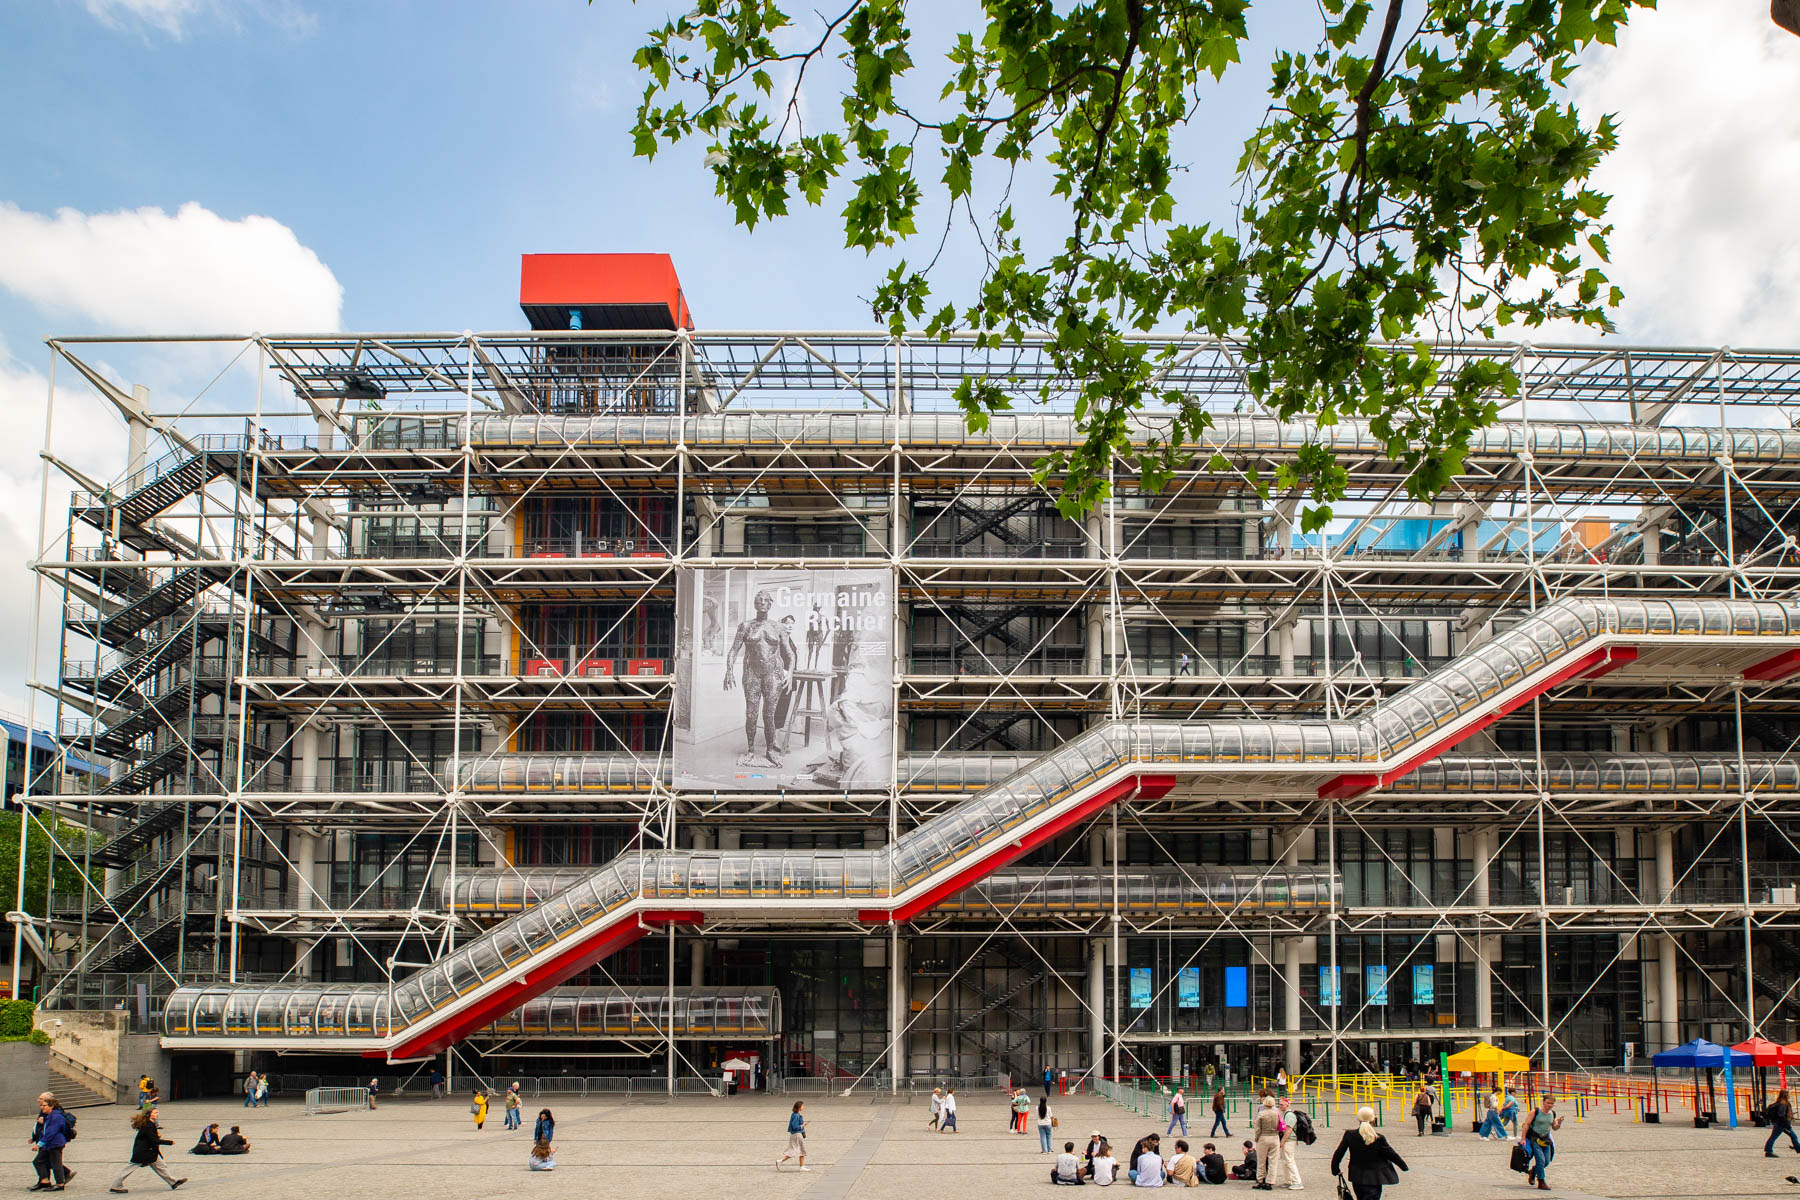 Exterior of the Centre Pompidou
Things to do in Paris at Night
Best museums in Paris